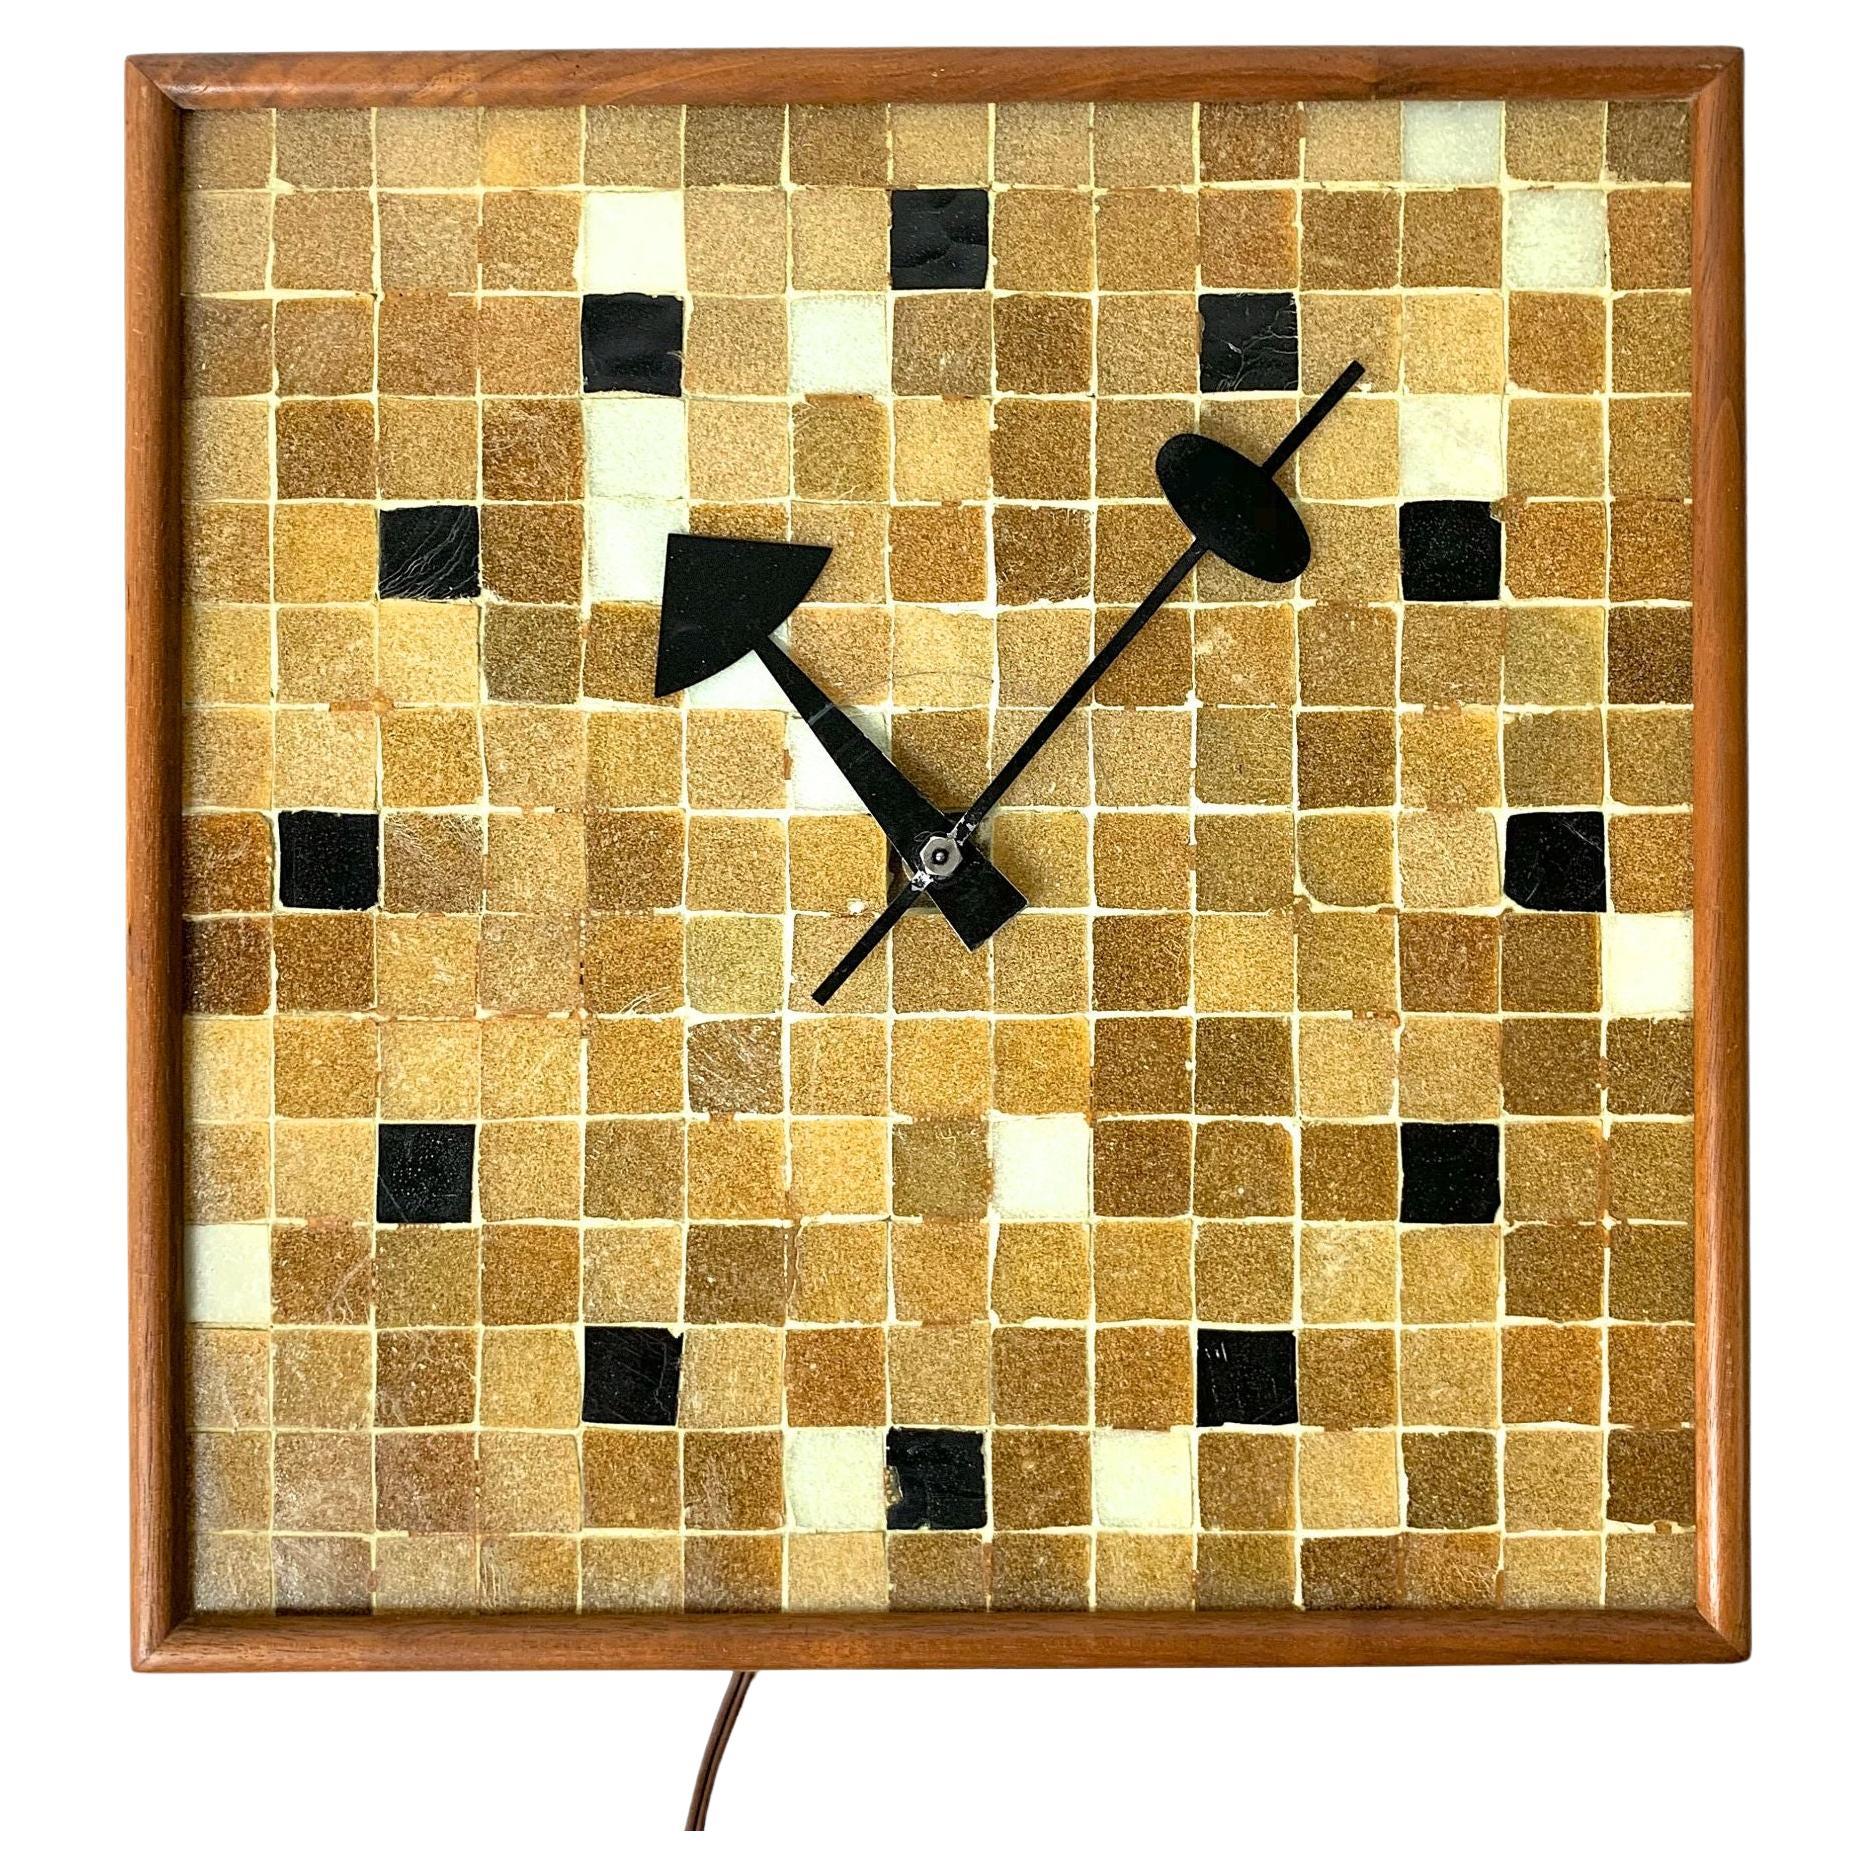 Rare Mosaic Tile Wall Clock in Walnut by George Nelson & Assoc circa 1950s For Sale